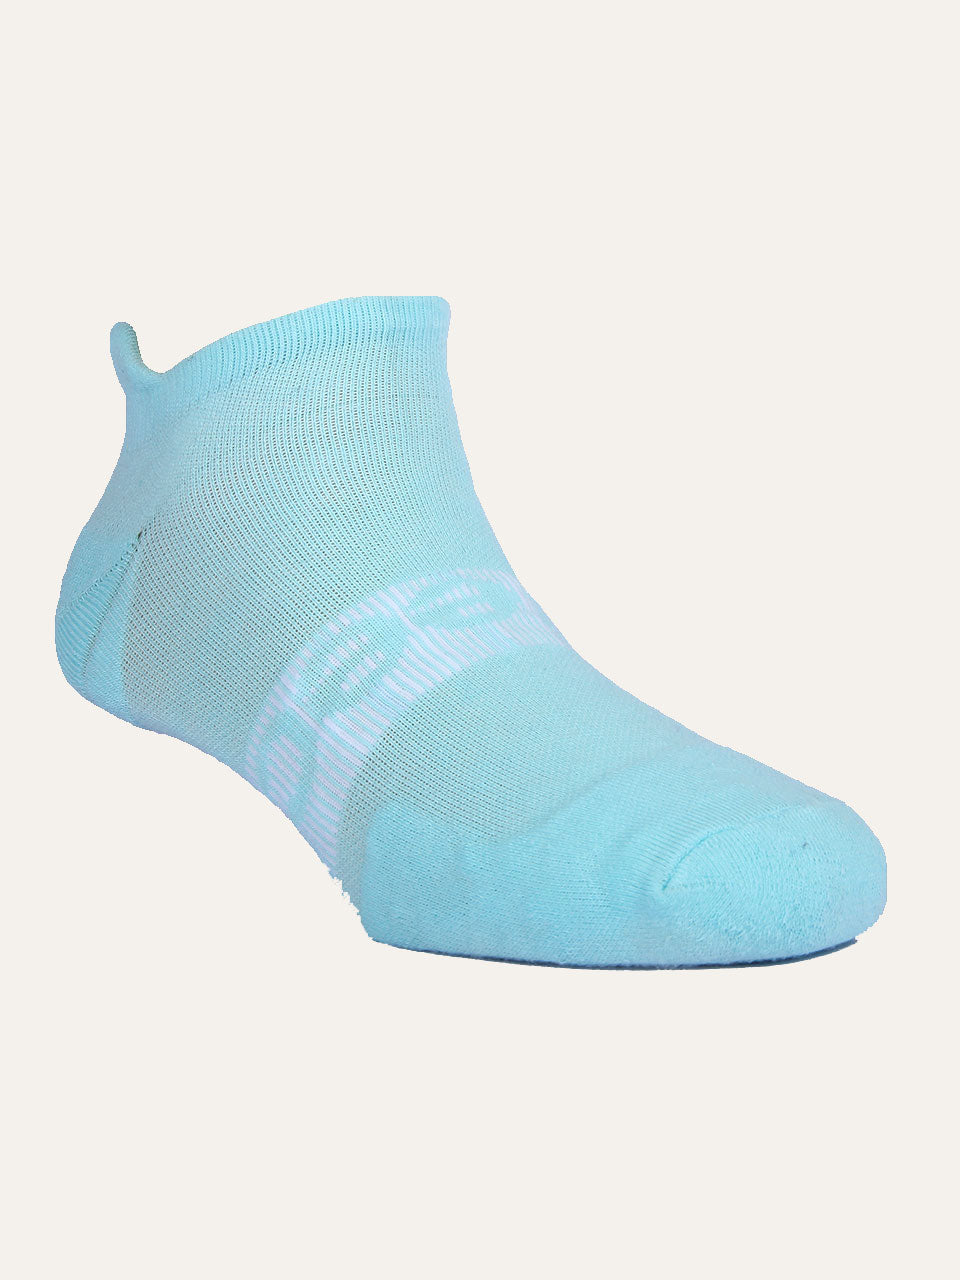 Bamboo Active Socks - Pack of 4